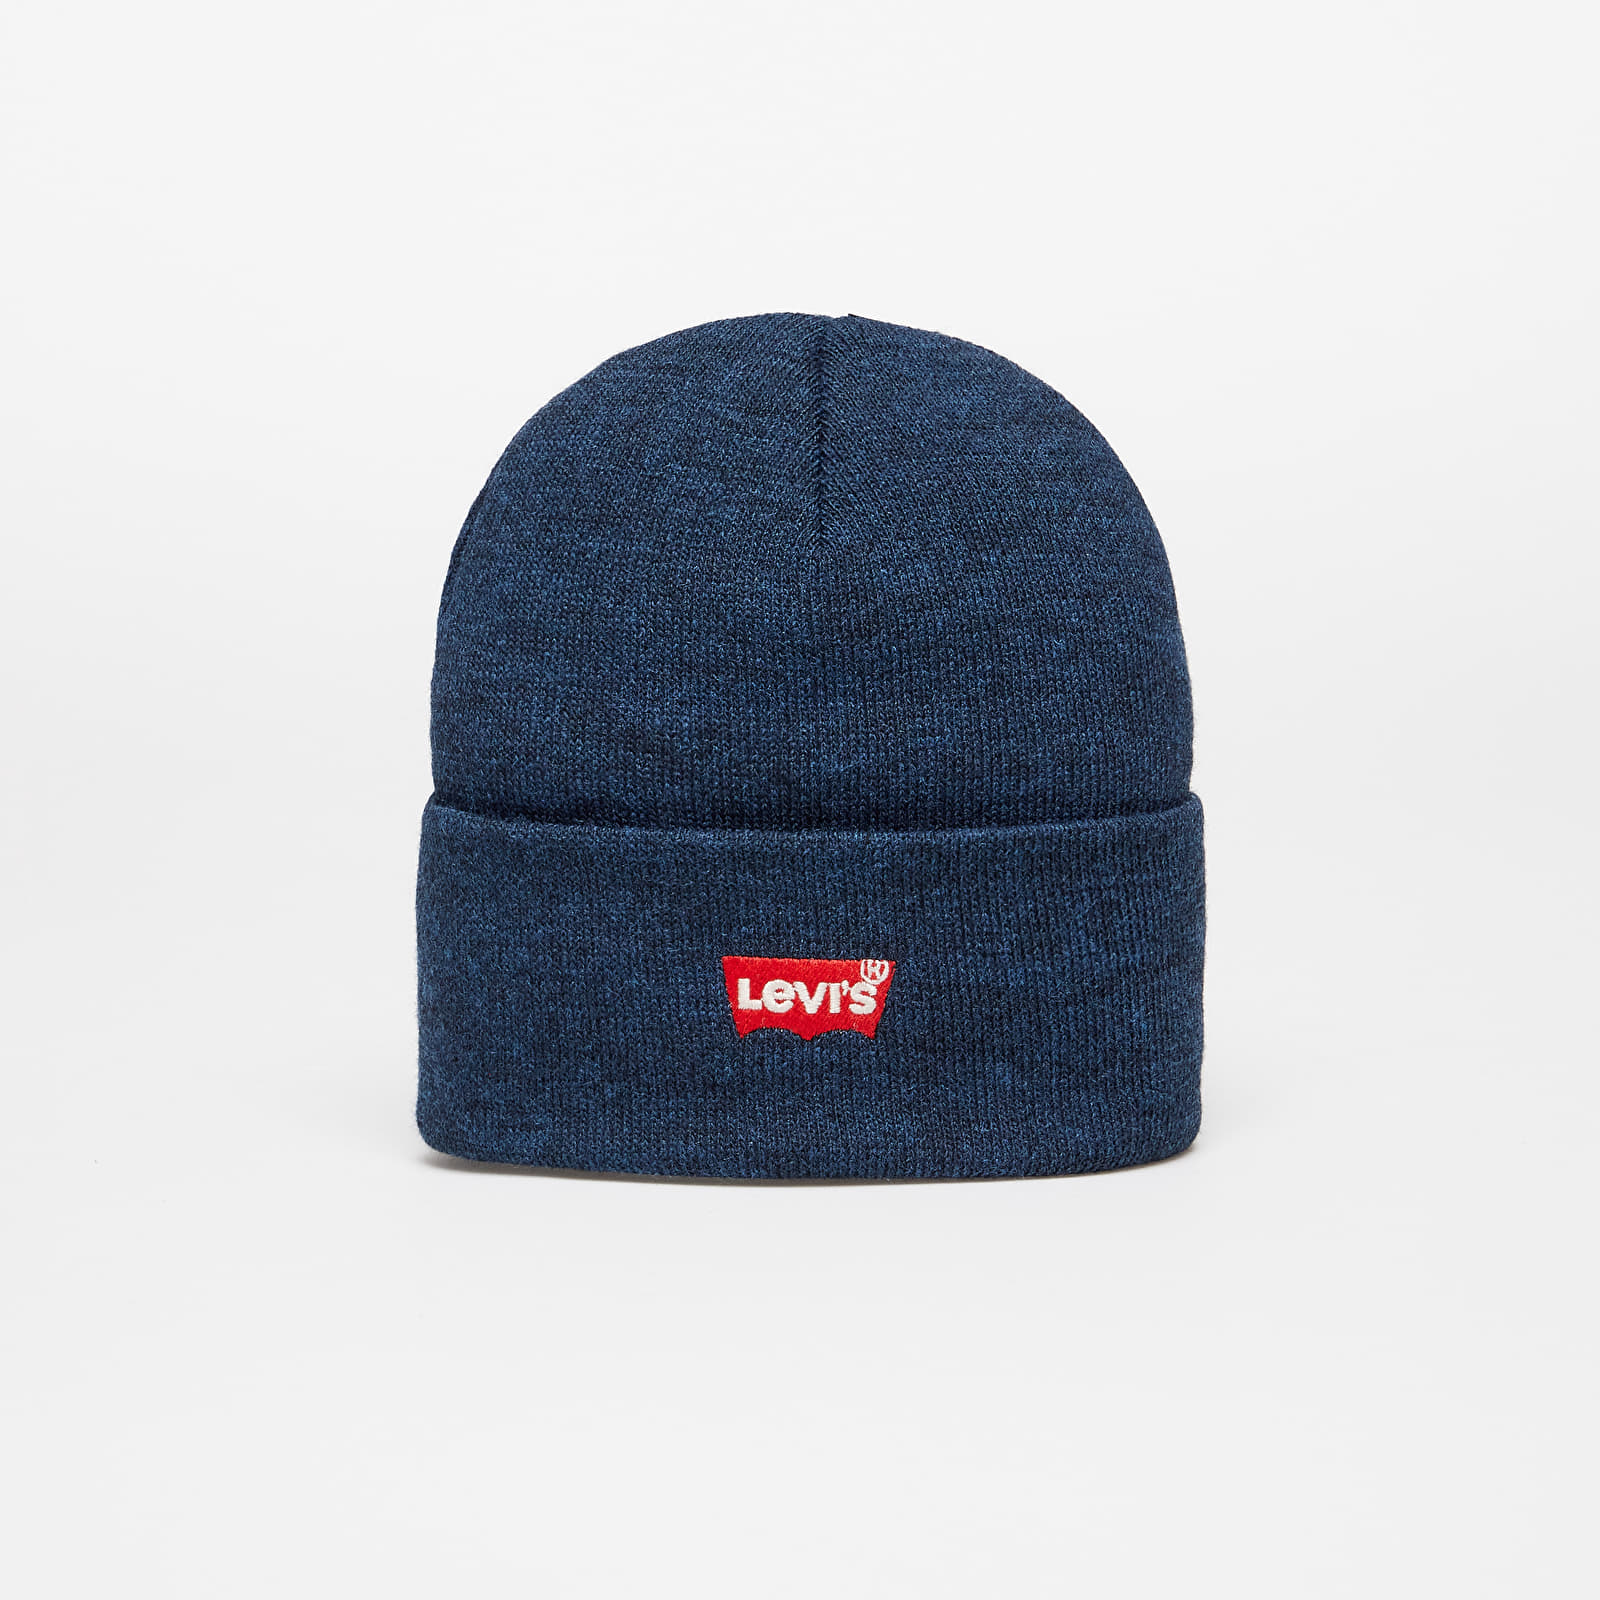 Čiapky Levi's ® Batwing Embroidered Beanie melange navy